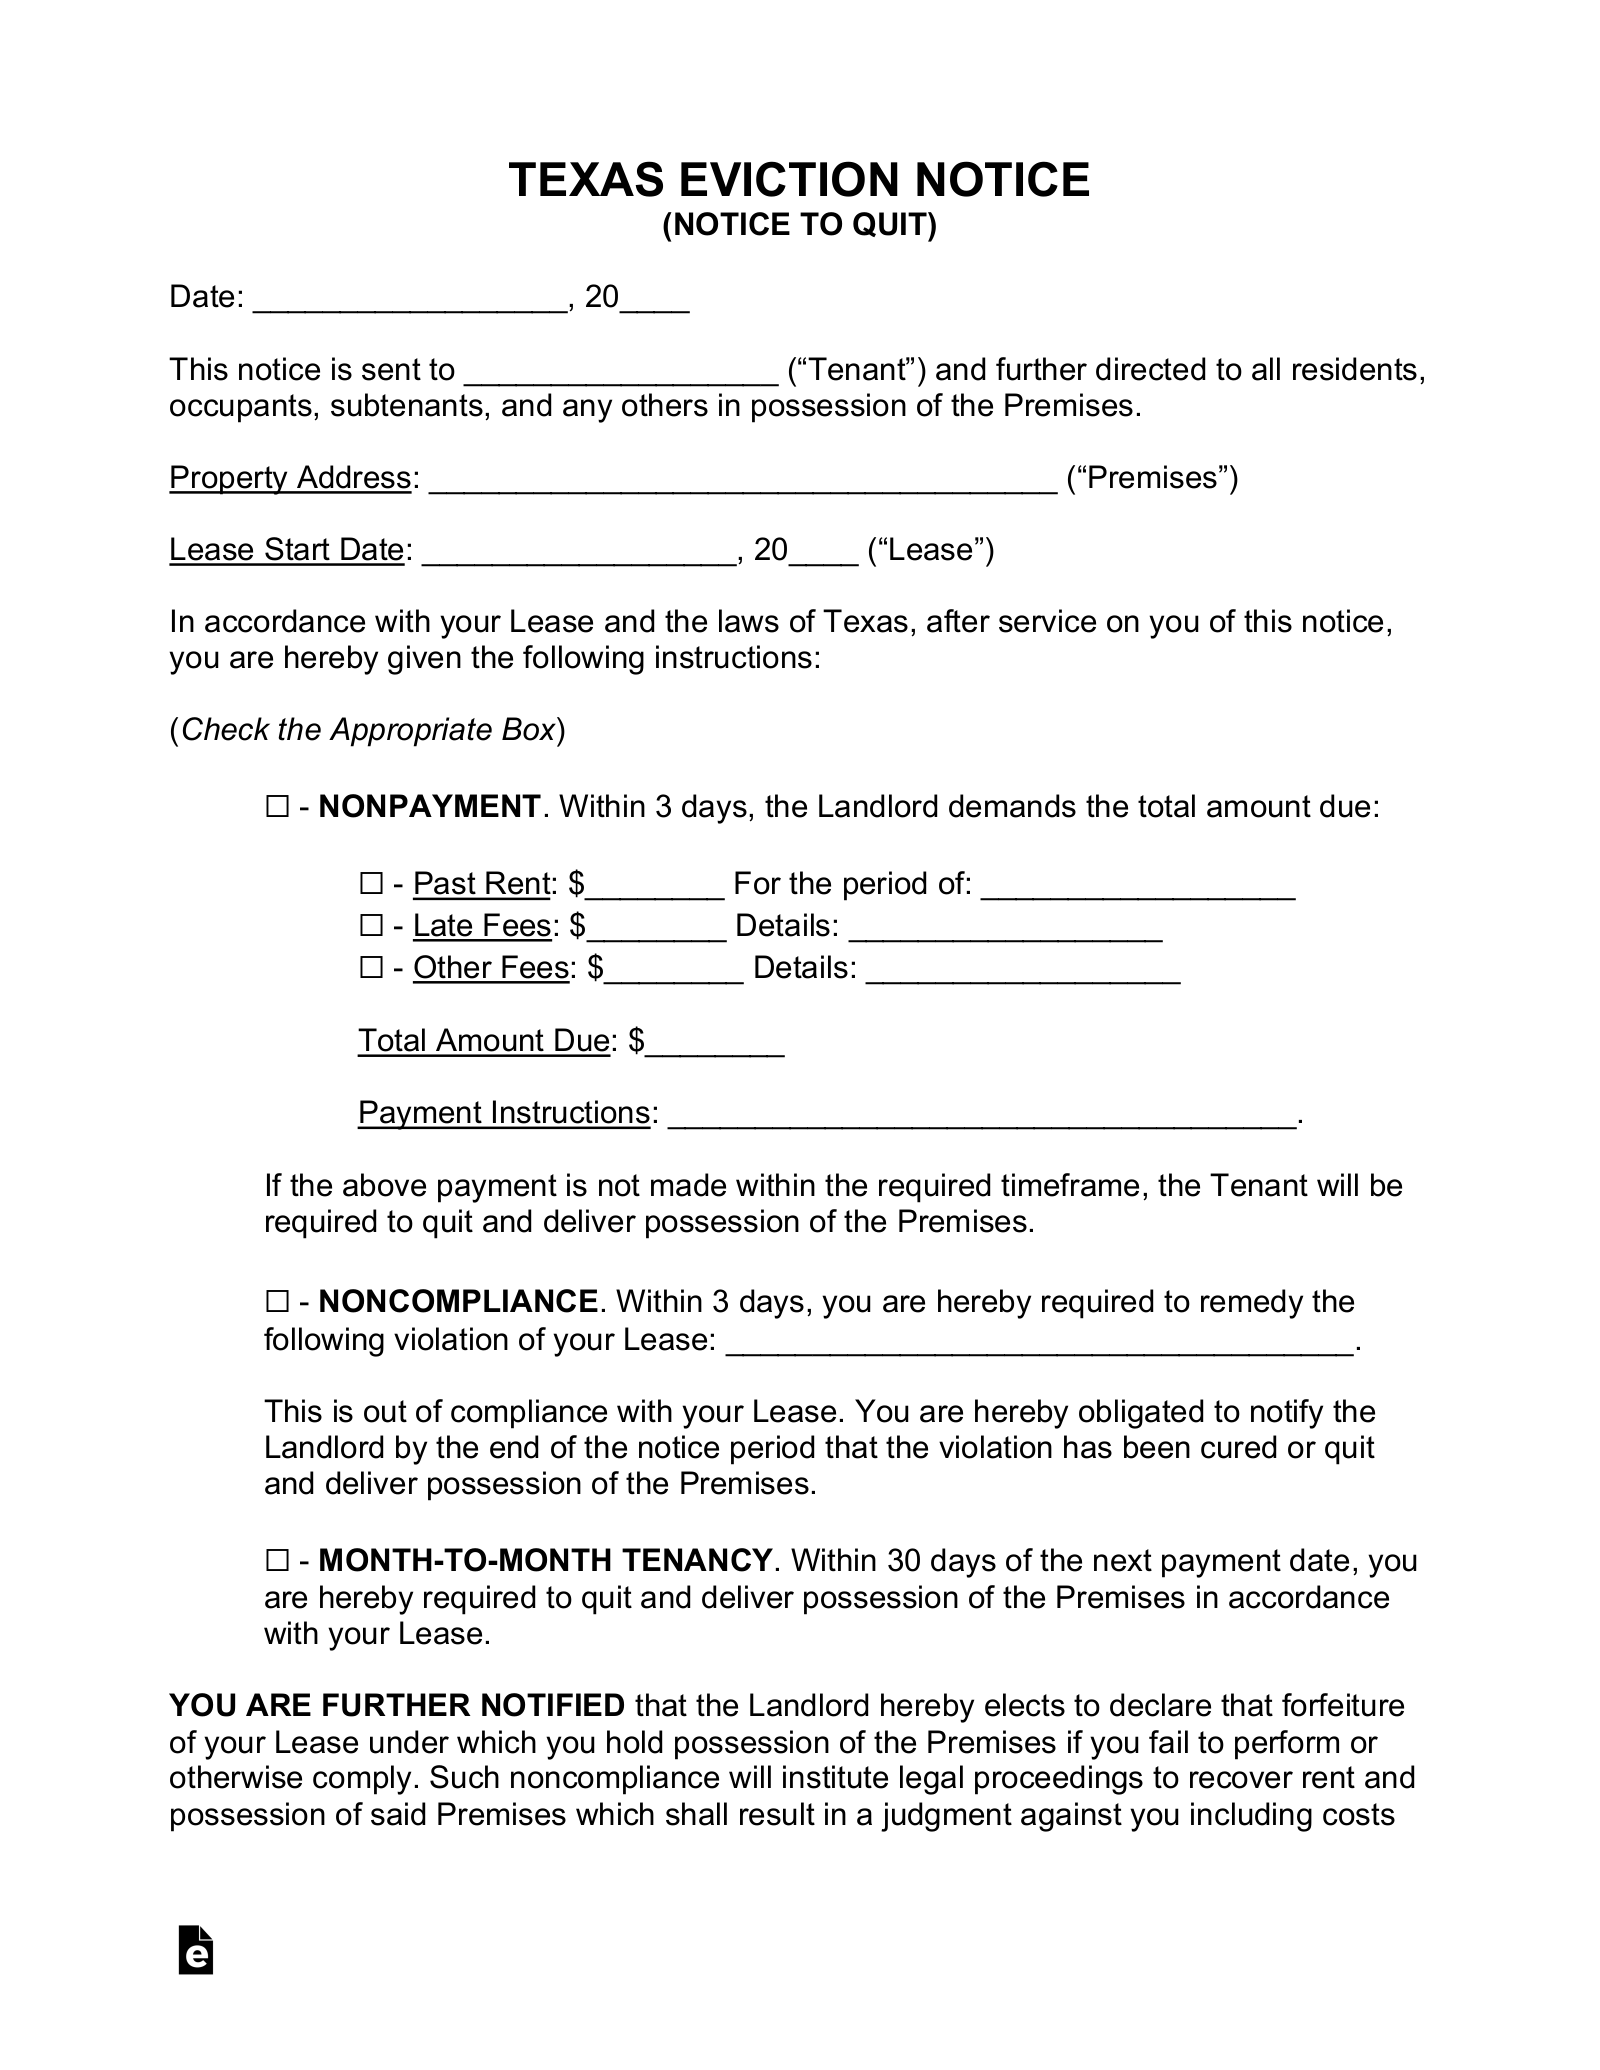 Free Eviction Notice Letter from eforms.com